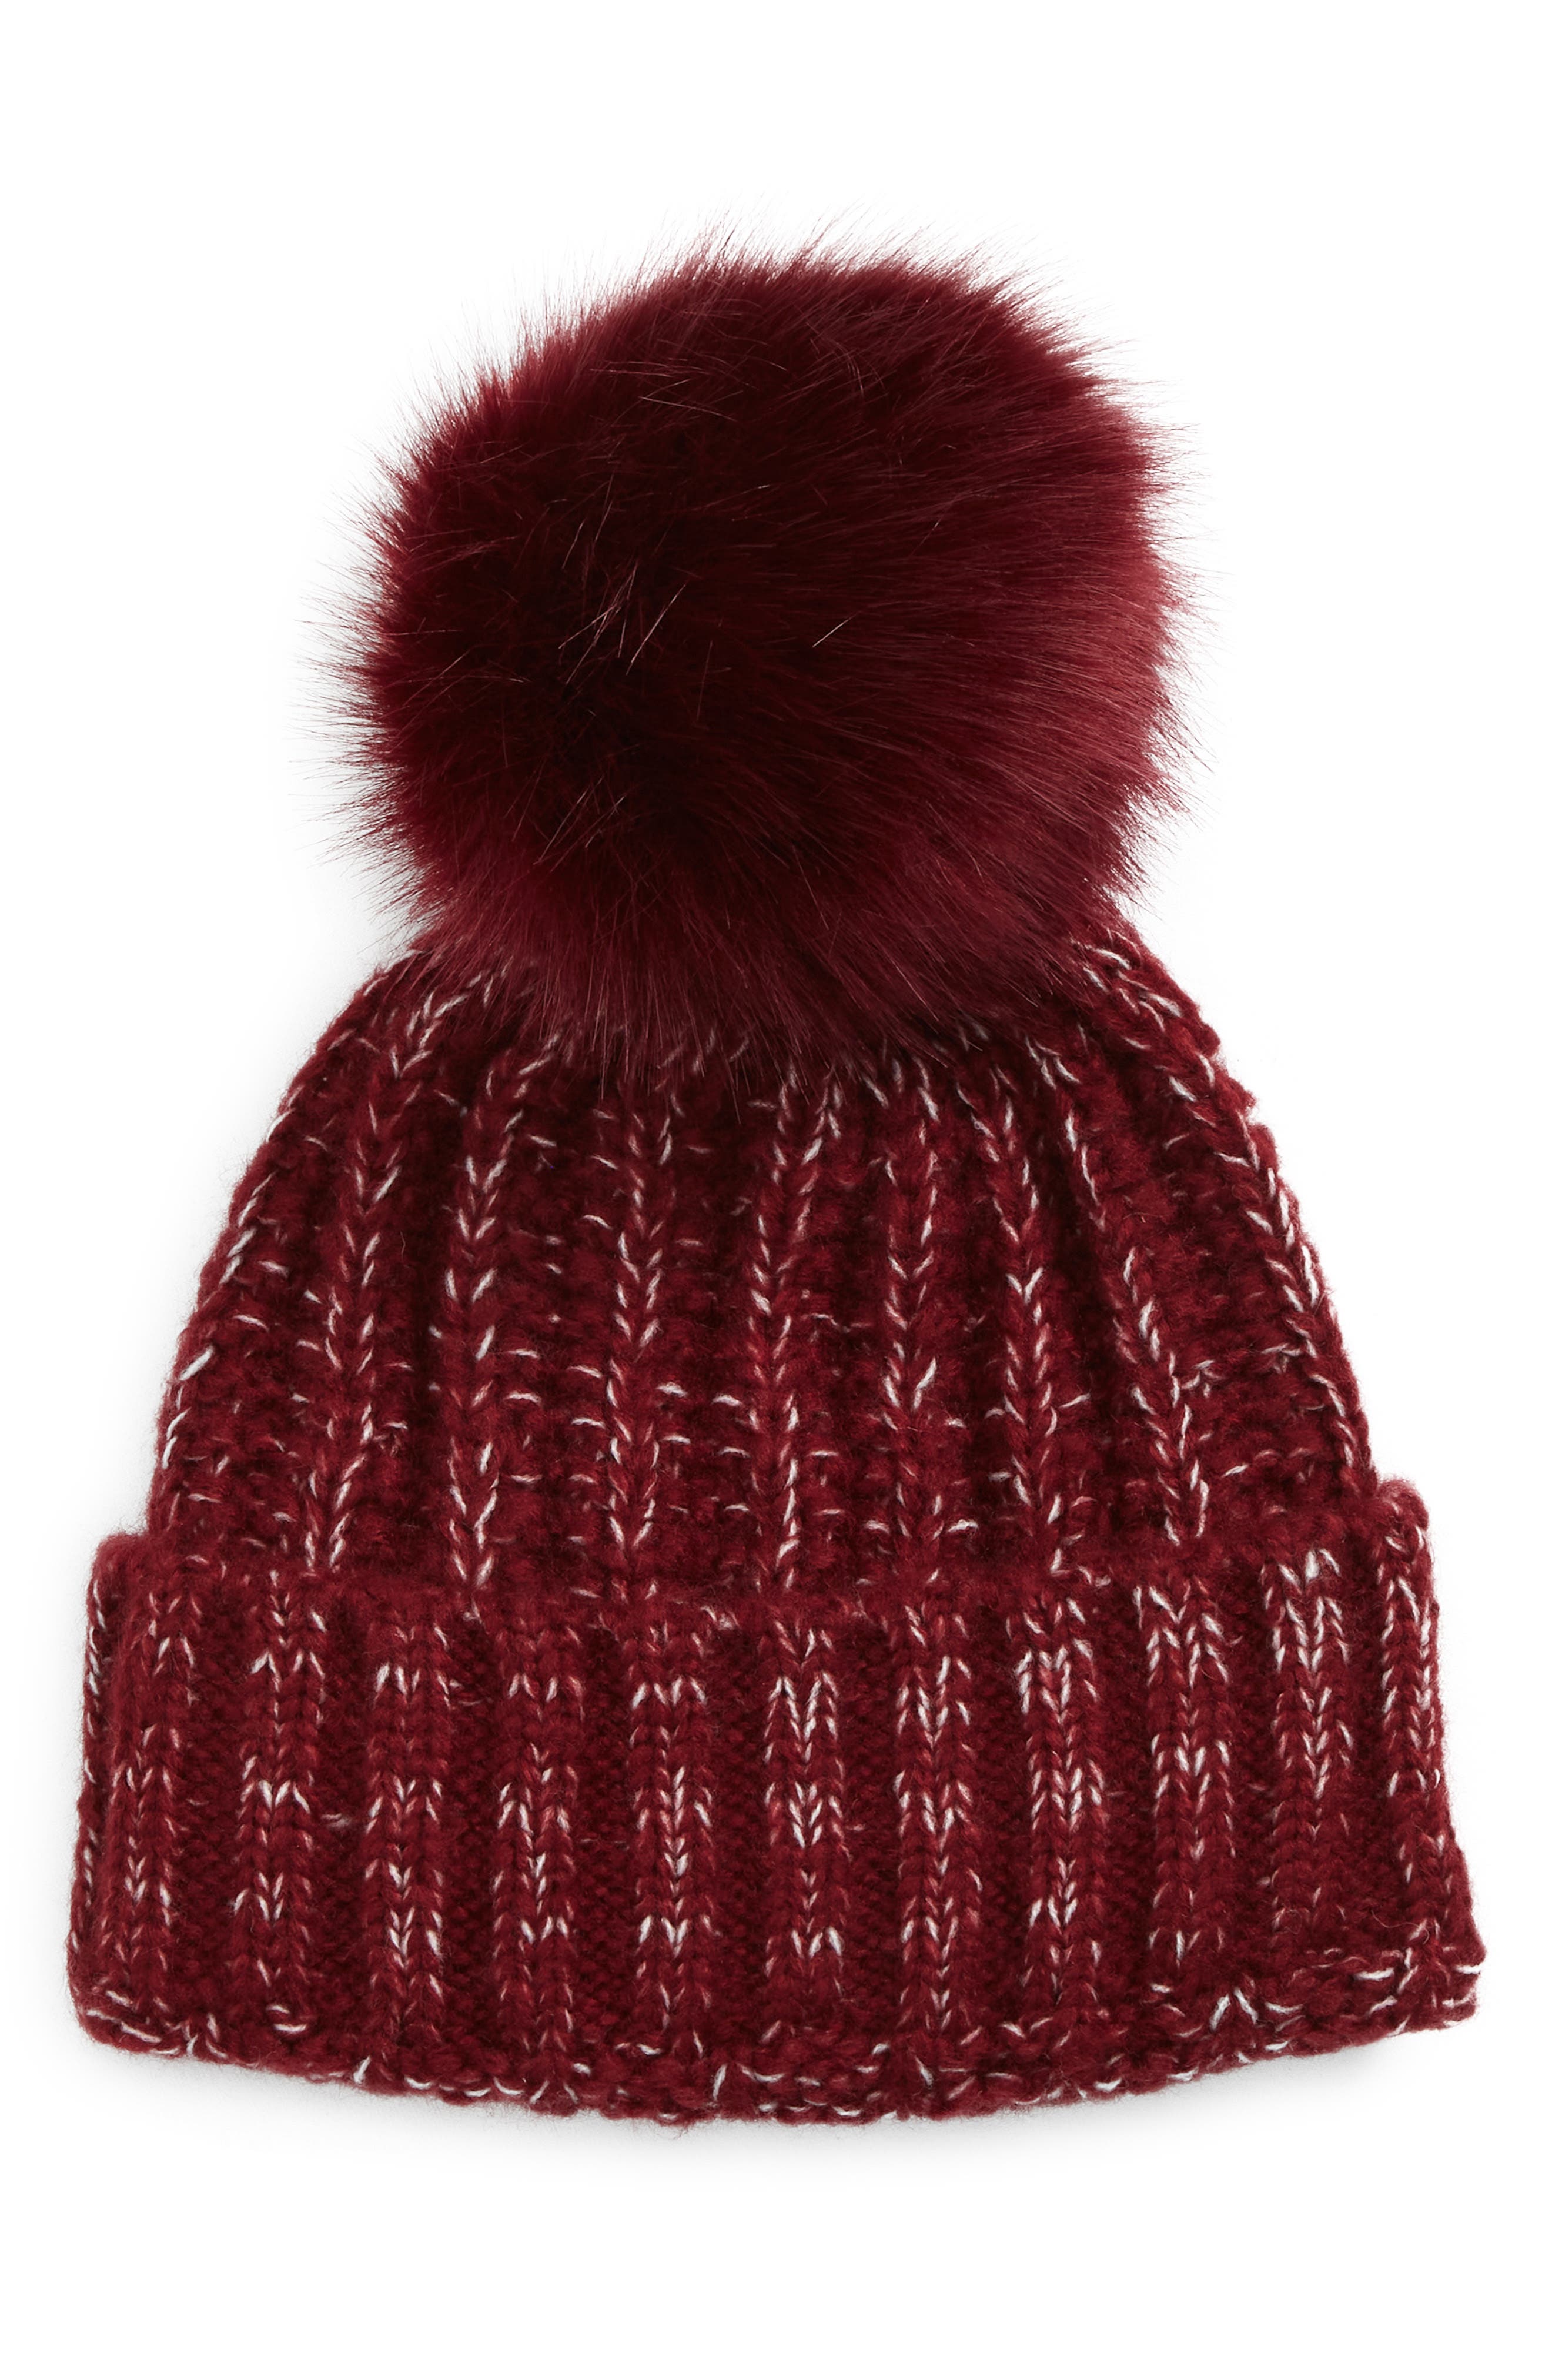 Kyi Kyi Chunky Wool Blend Beanie with Faux Fur Pom in Silver/Grey Black Tip at Nordstrom